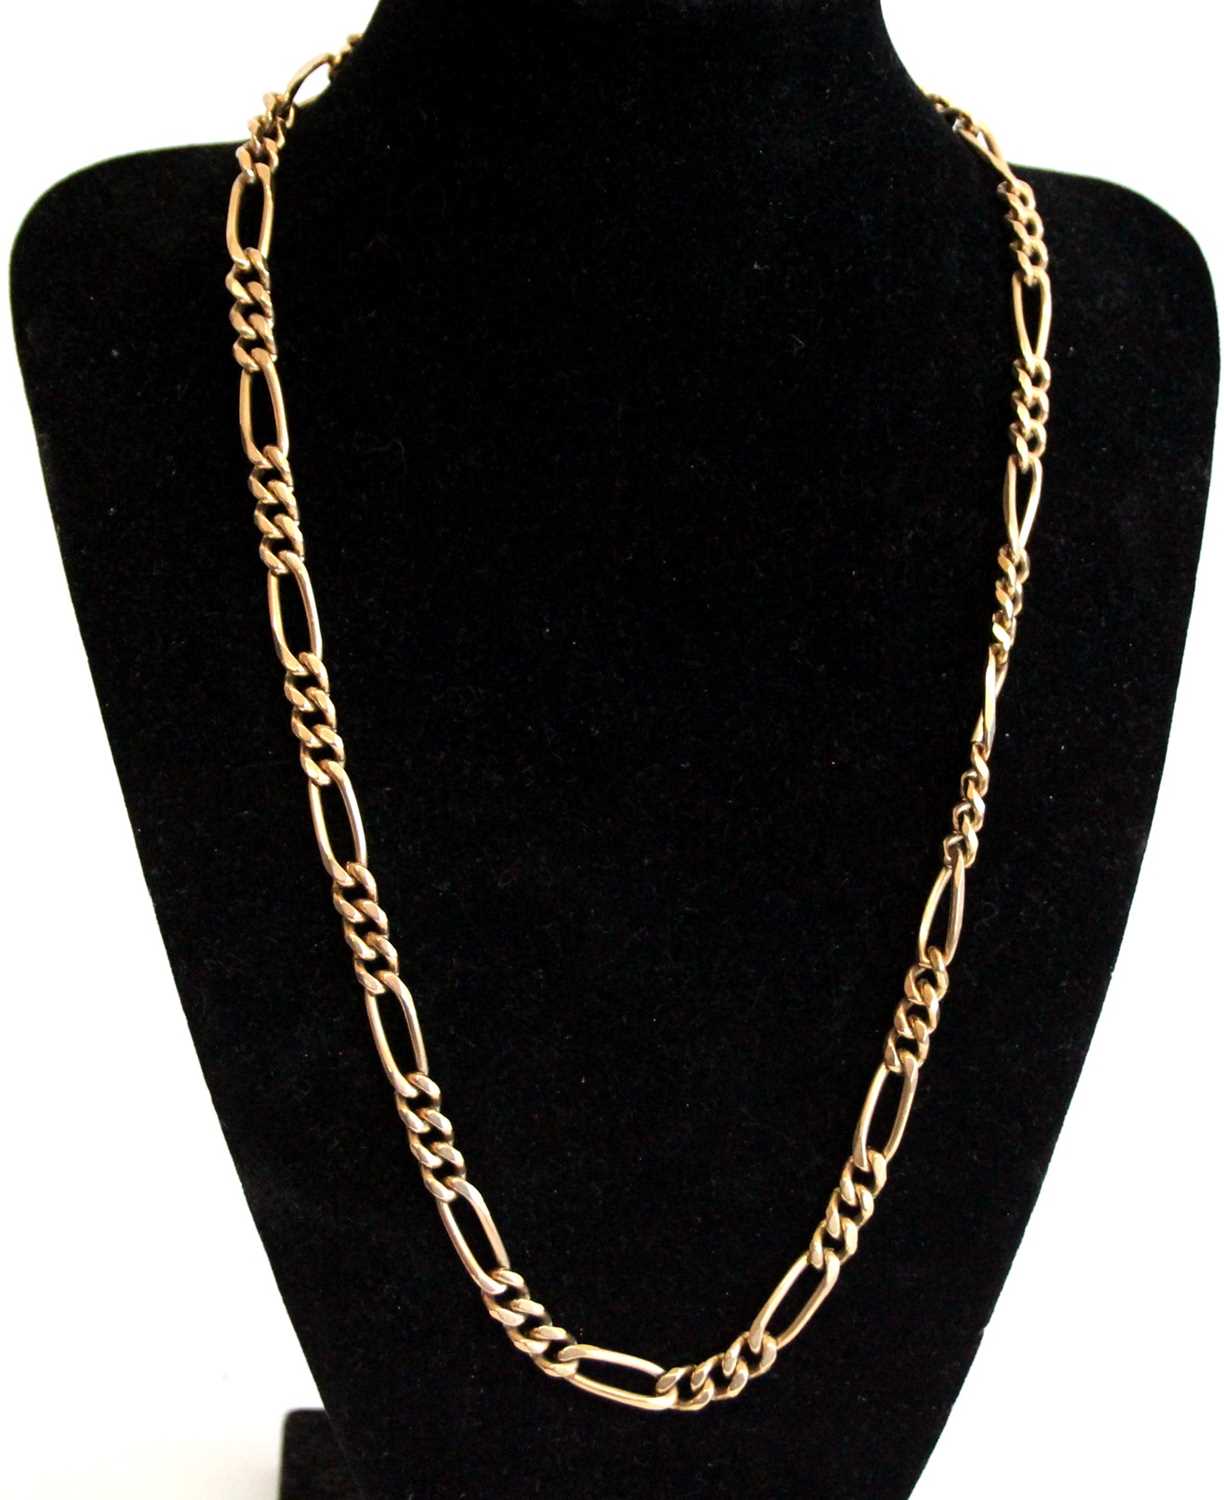 A 9ct gold figaro link neck chain, sponsor RJ, 44g, length 53cm In excellent condition with no